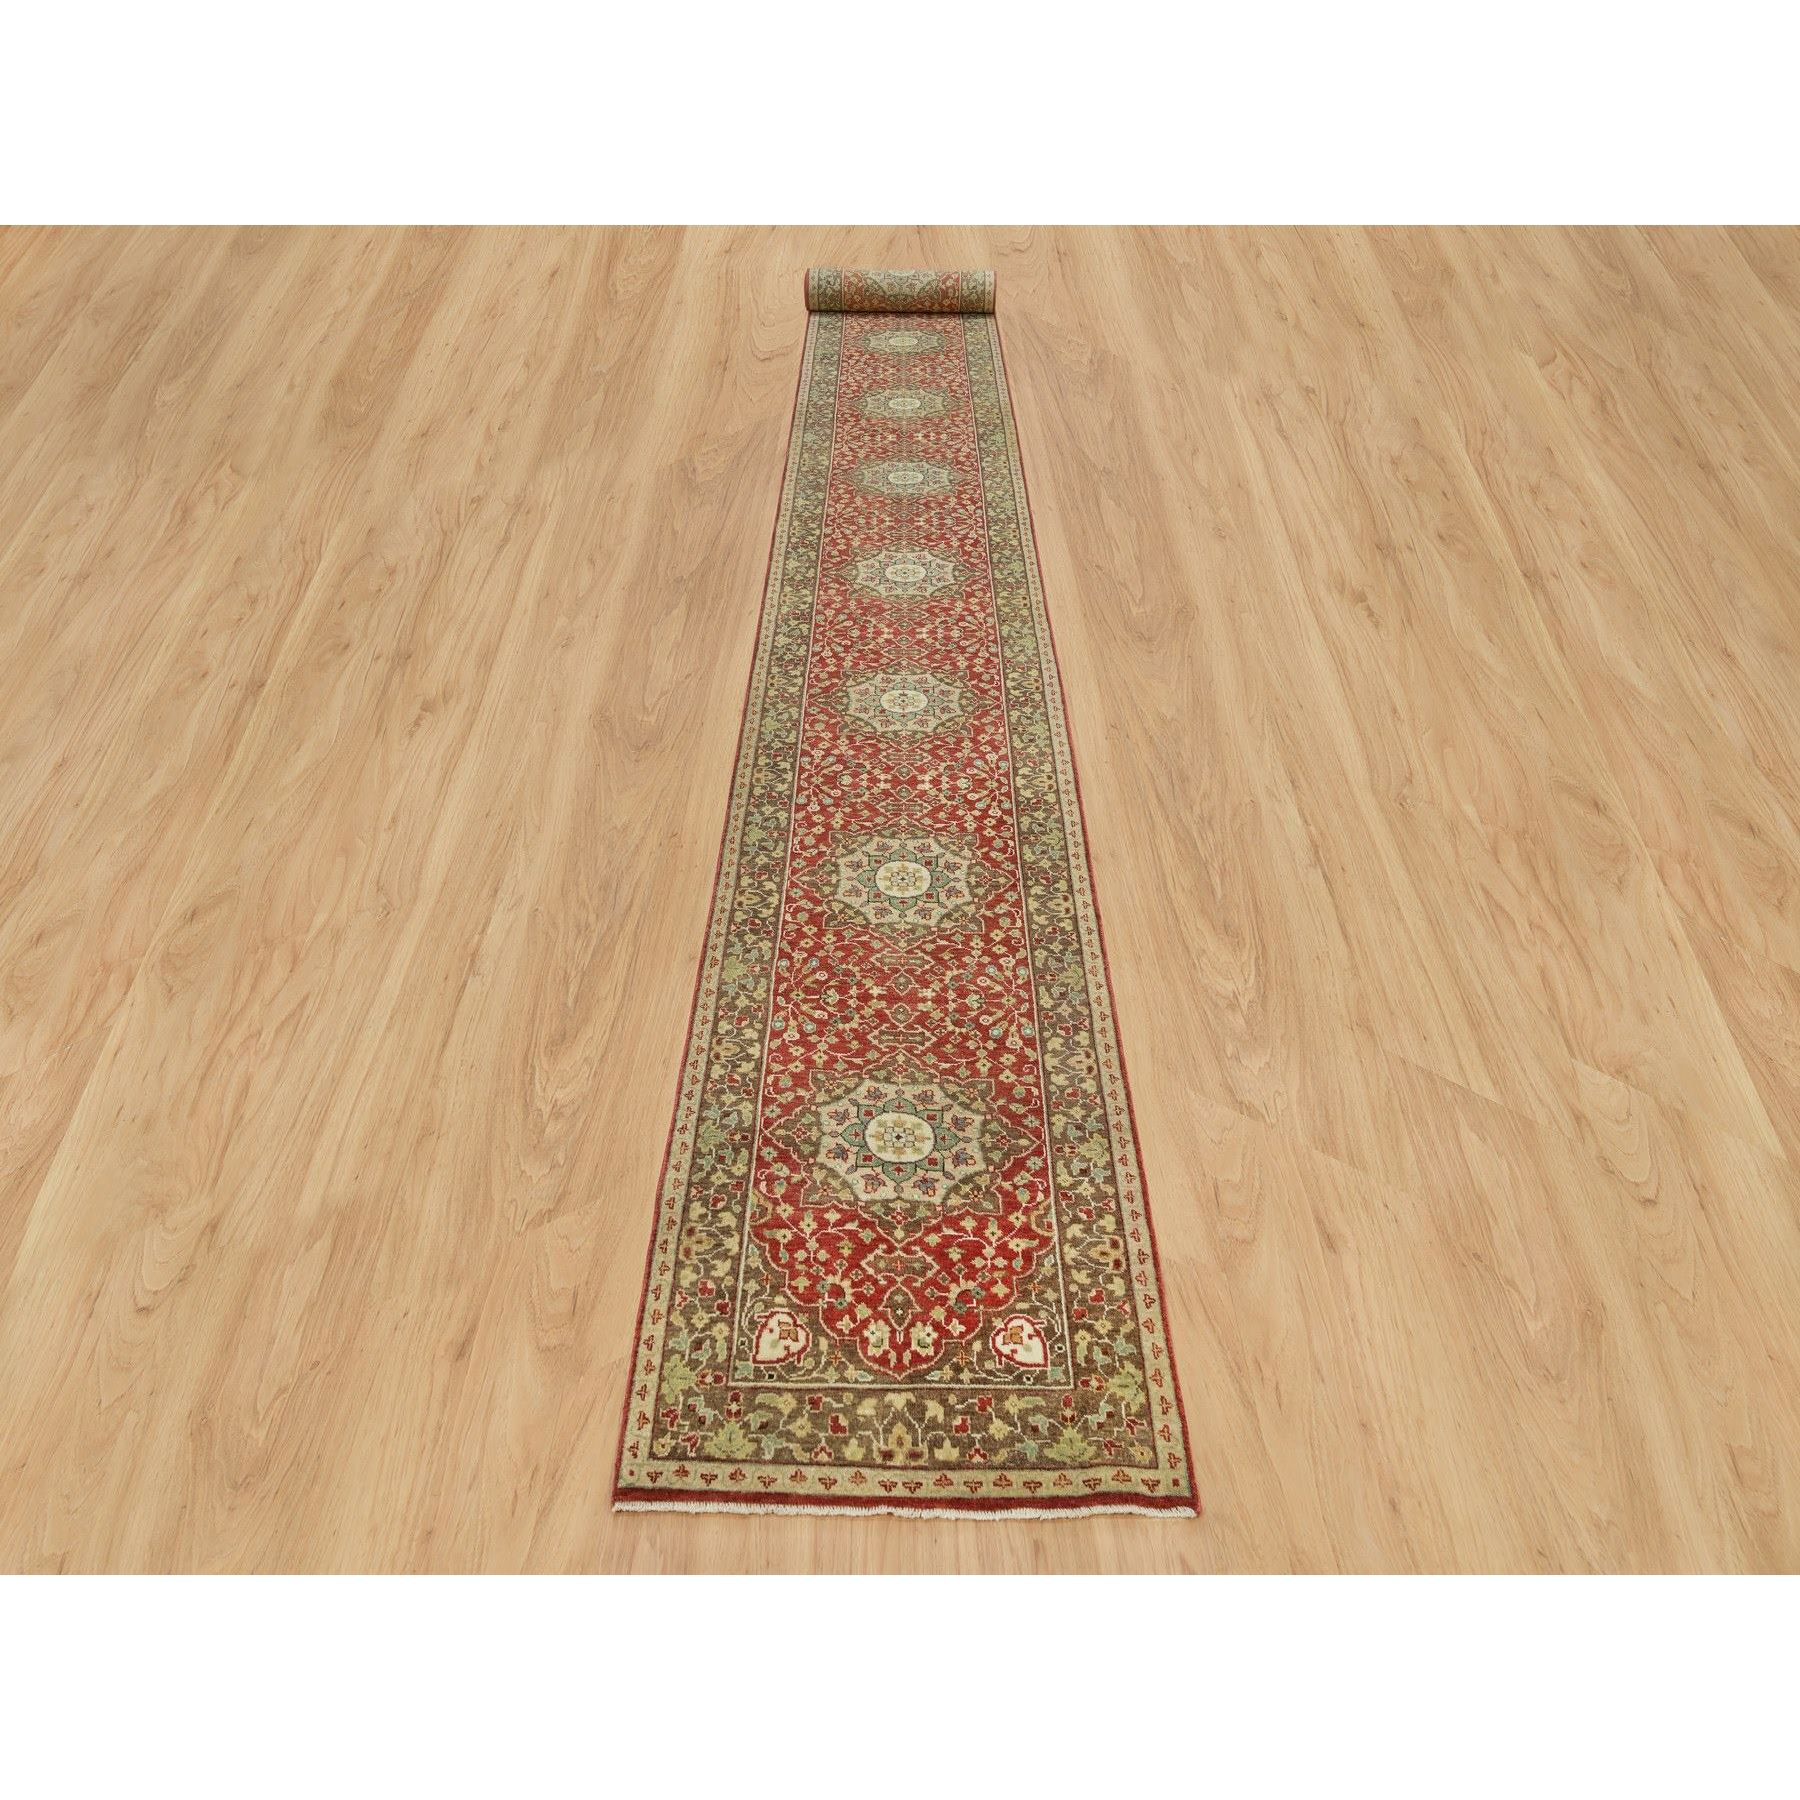 2'7"x22' Cherry Red, Antiqued Tabriz Haji Jalili Design, Fine Weave, Natural Dyes, All Wool, Plush Pile, Hand Woven, XL Runner Oriental Rug 